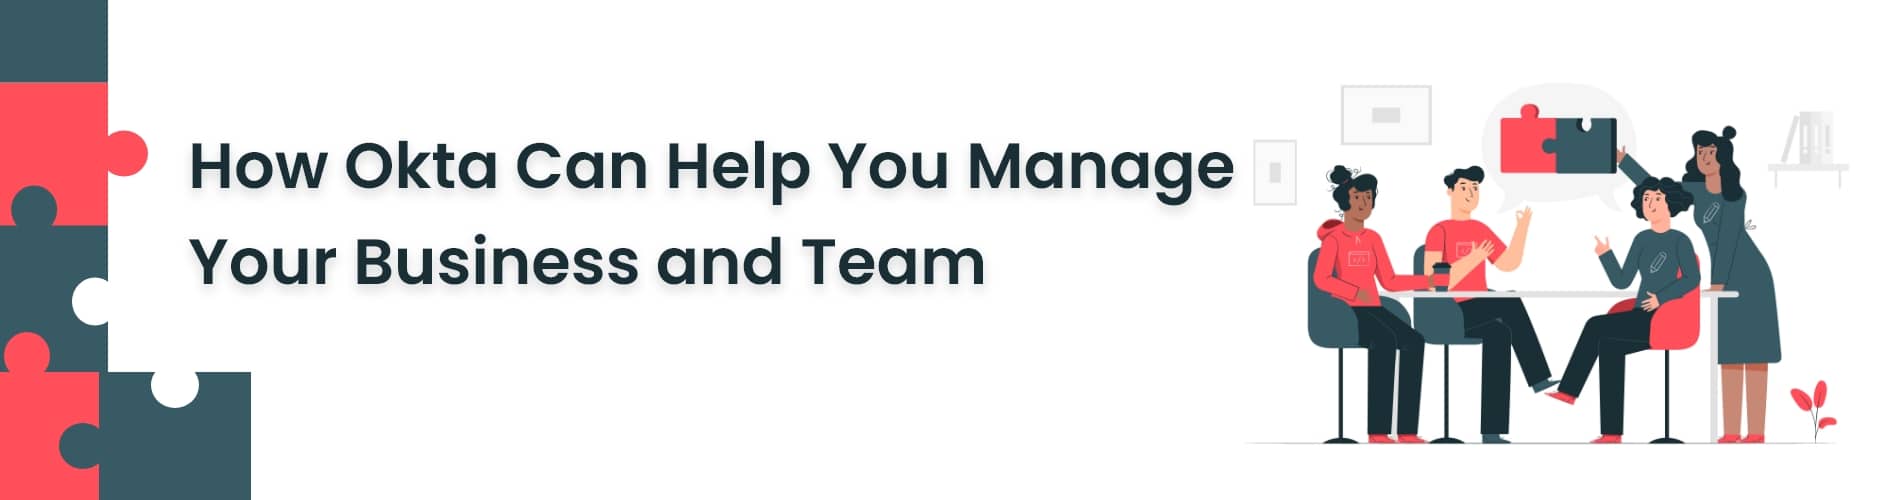 How Okta Can Help You Manage Your Business and Team